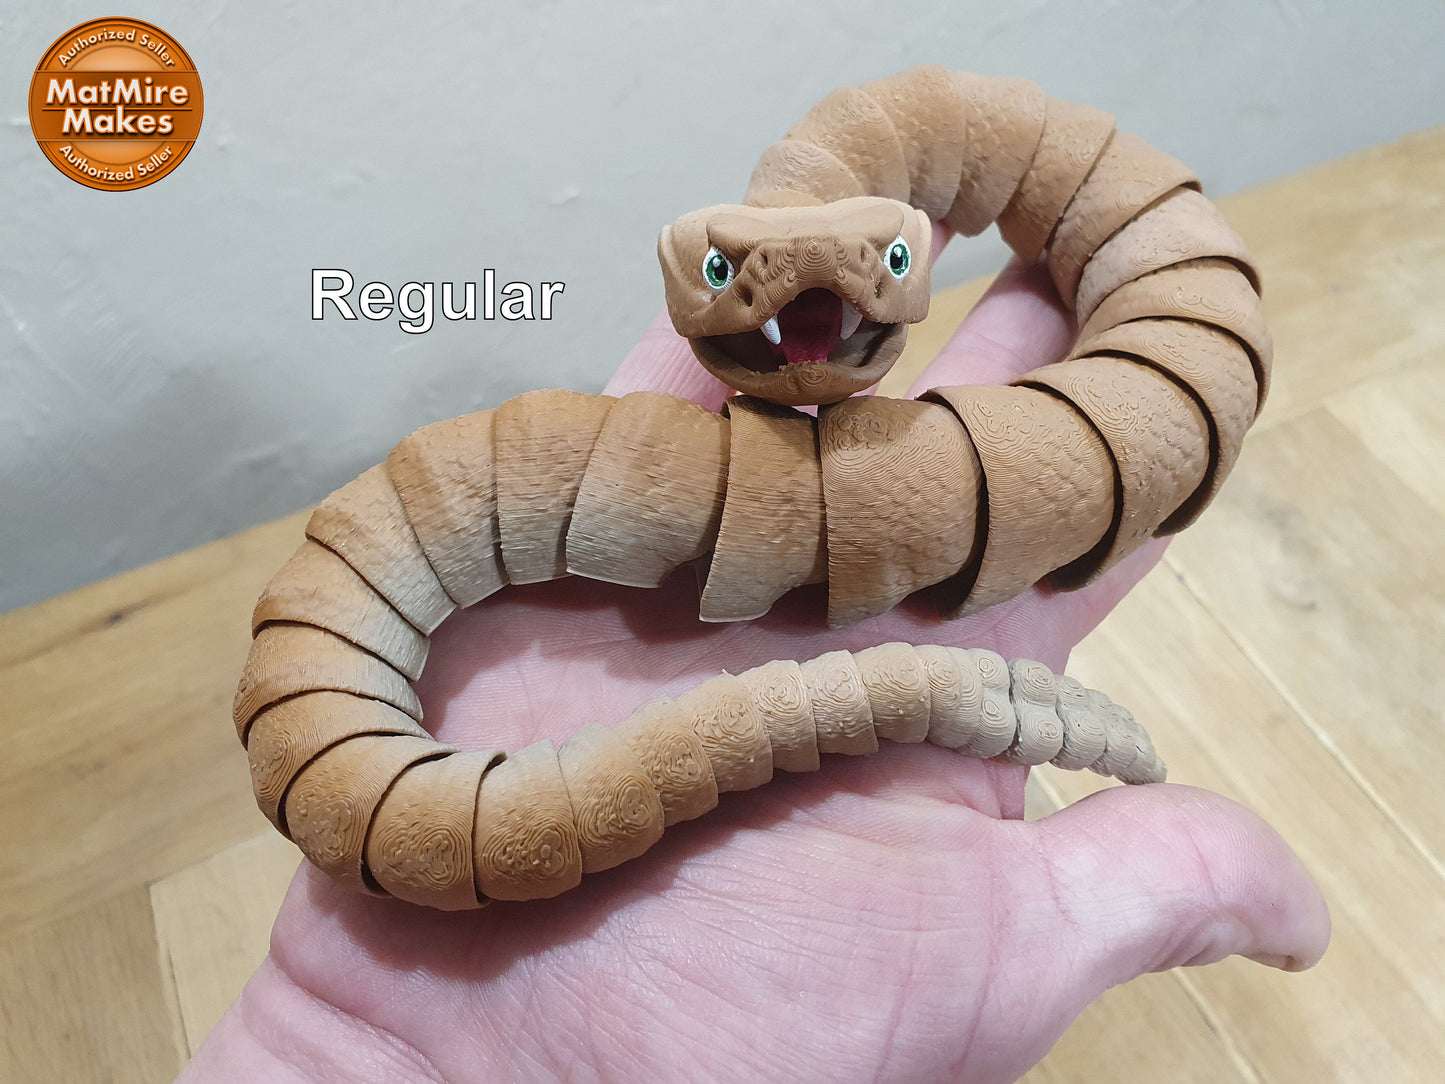 Cute Flexi Rattlesnake -  Articulated Flexible 3D Print with functional rattle! Professionally Hand painted finishing details